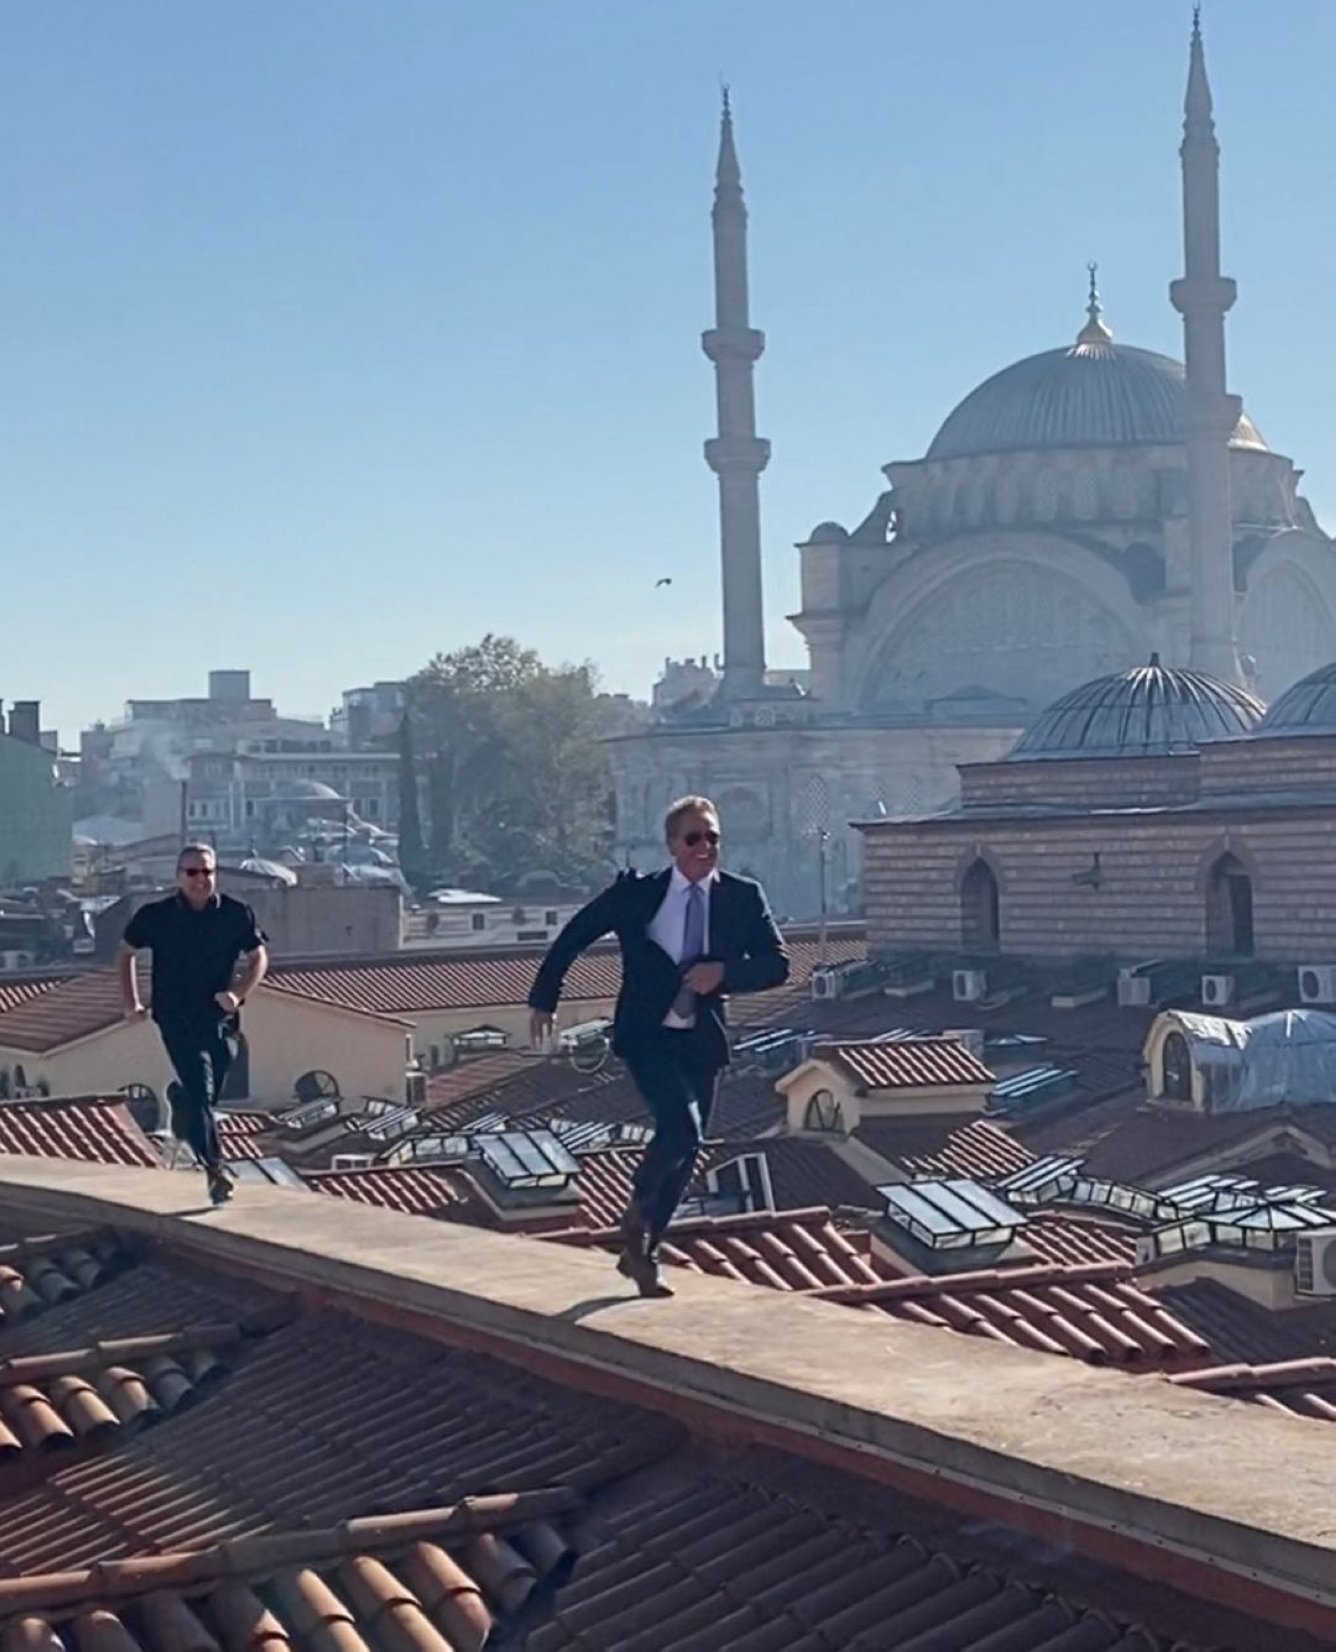 U.S. Ambassador to Ankara Jeffry Flake emulated James Bond and ran on the roof of the Grand Bazaar, Istanbul, Oct. 26, 2022 (Photo courtesy of Jeffry Flake via Instagram)